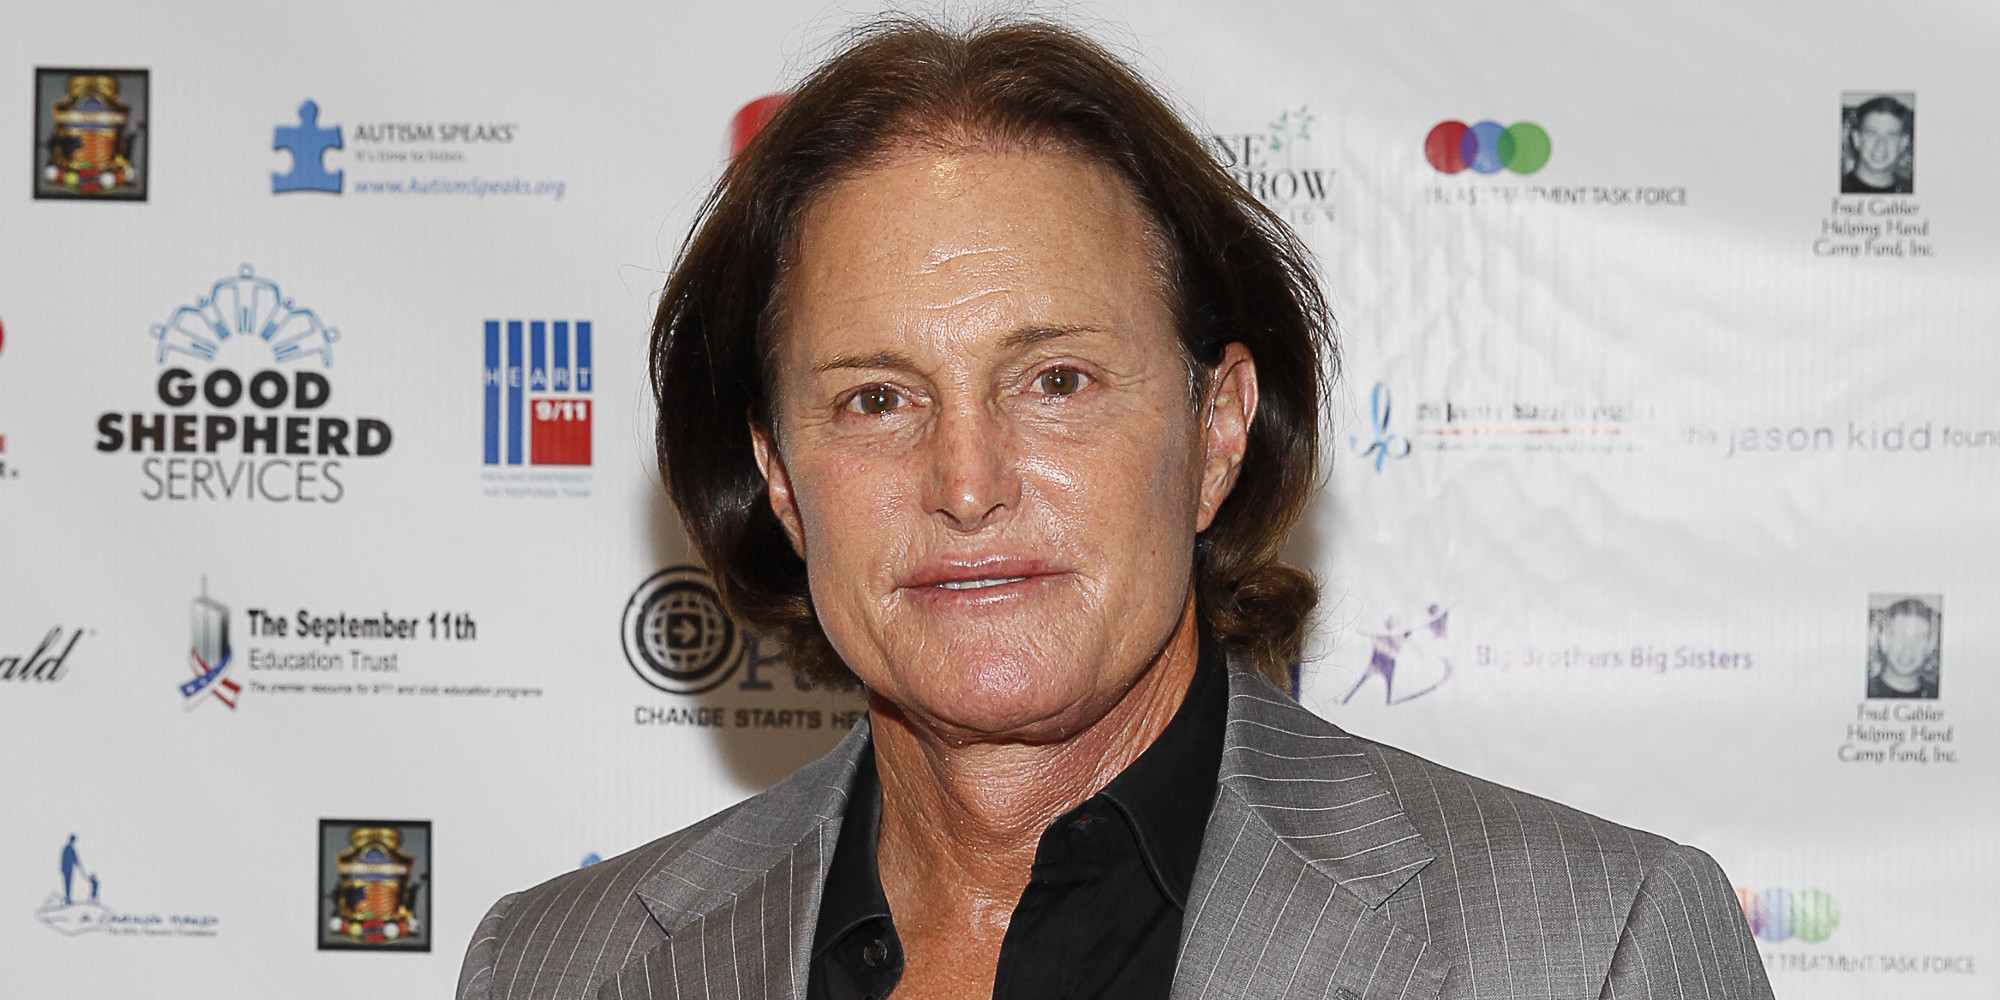 SportsBet accused of transphobia for “taking bets” on Bruce Jenner’s new name